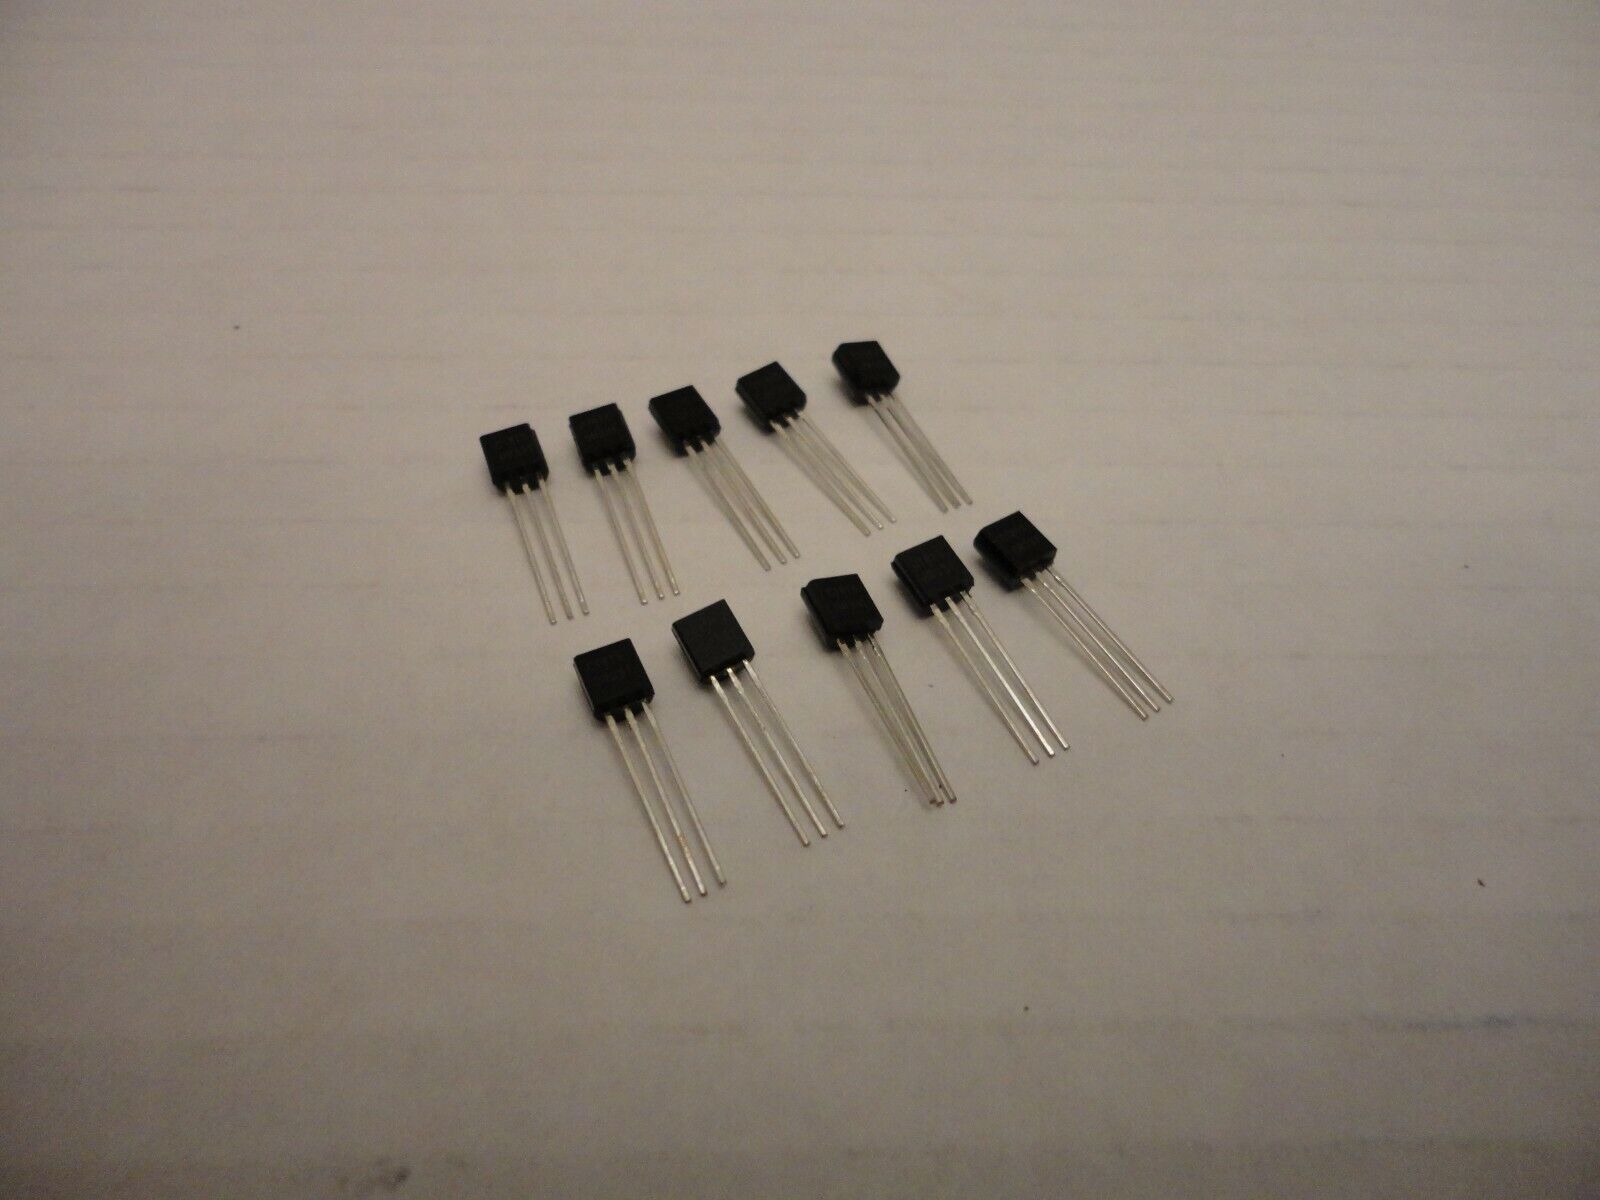 10 Pcs x S9014 TO-92 Transistor Electronic Chip Triode Three Pins Pack Set Lot